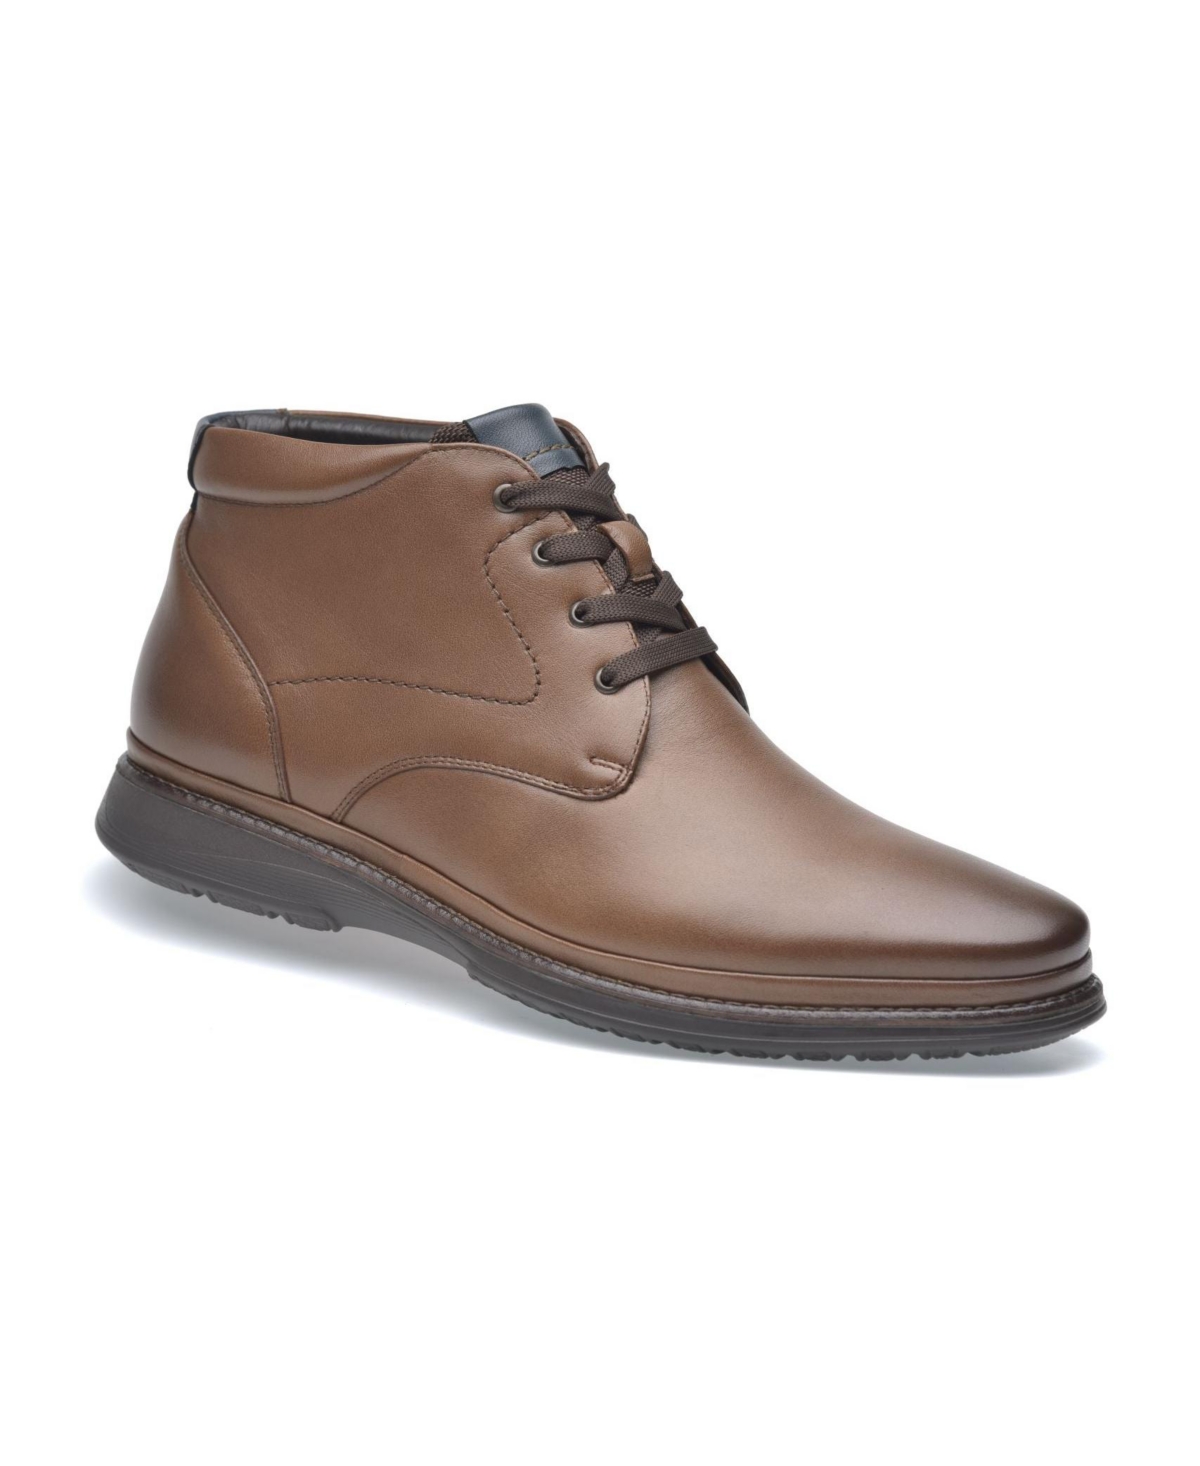 Men's Premium Comfort Lambskin Leather Low Ankle Boots - Barista brown